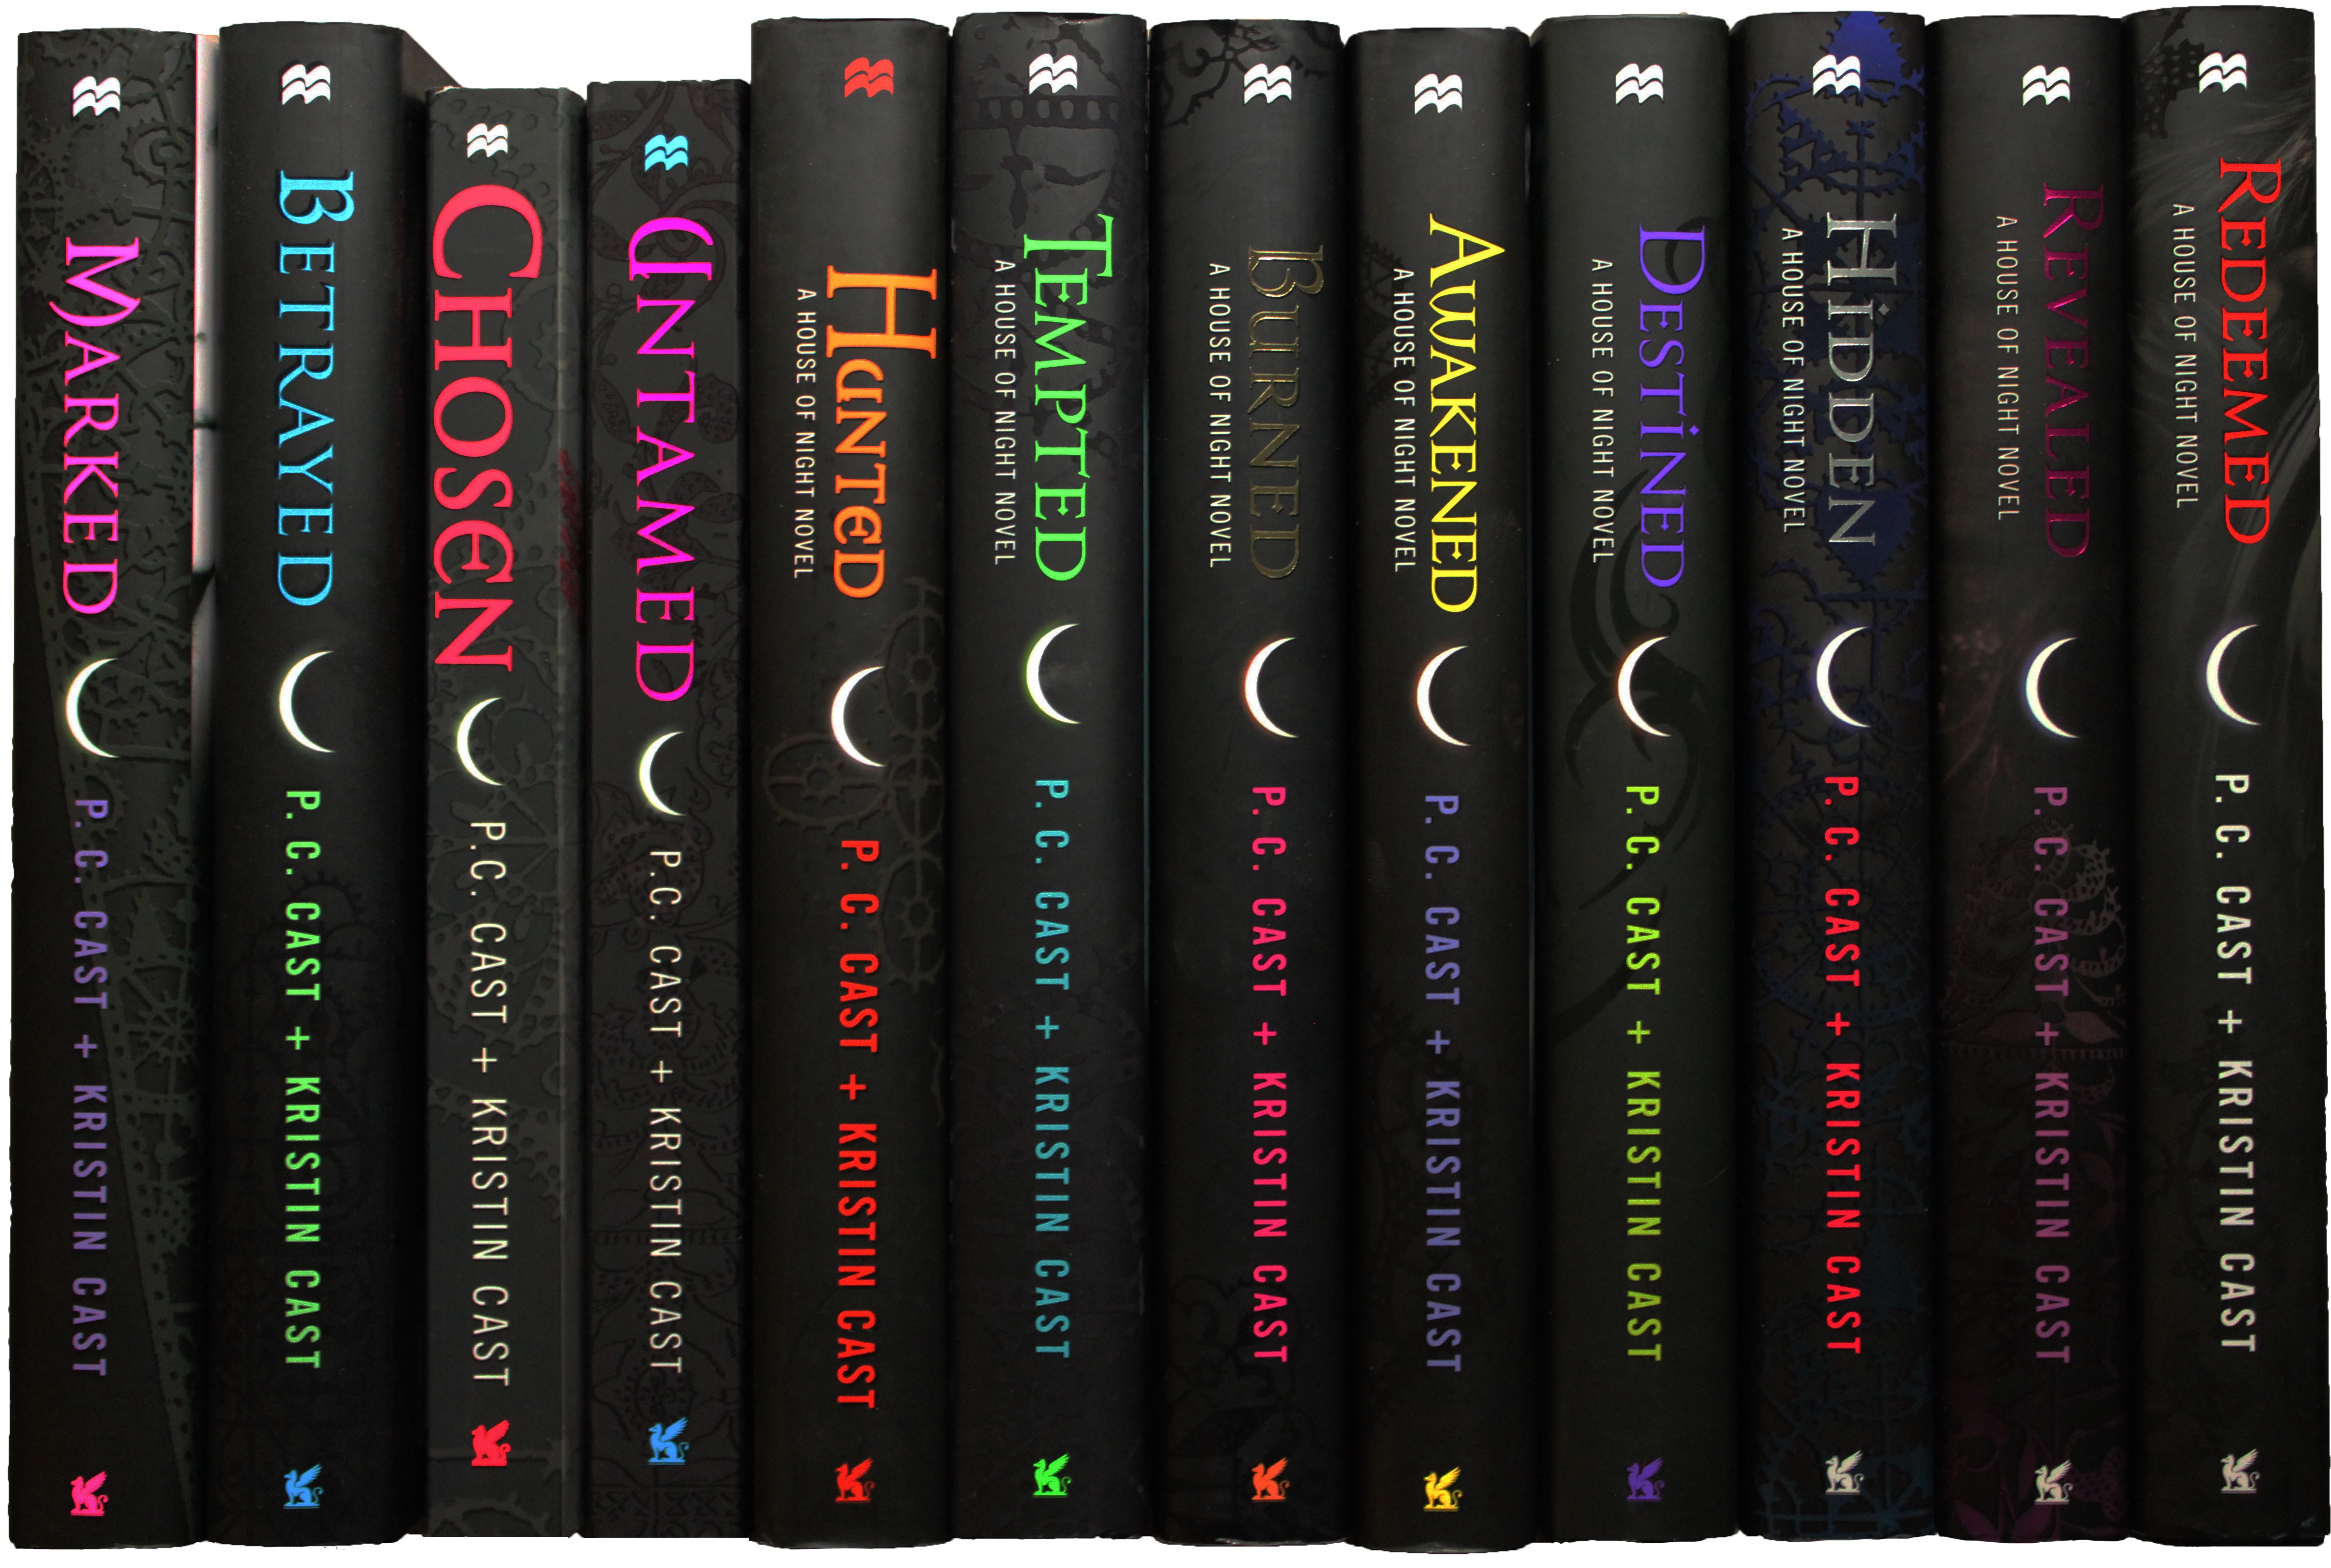 'House of Night' Book Series Is Coming to TV Take an Inside Look